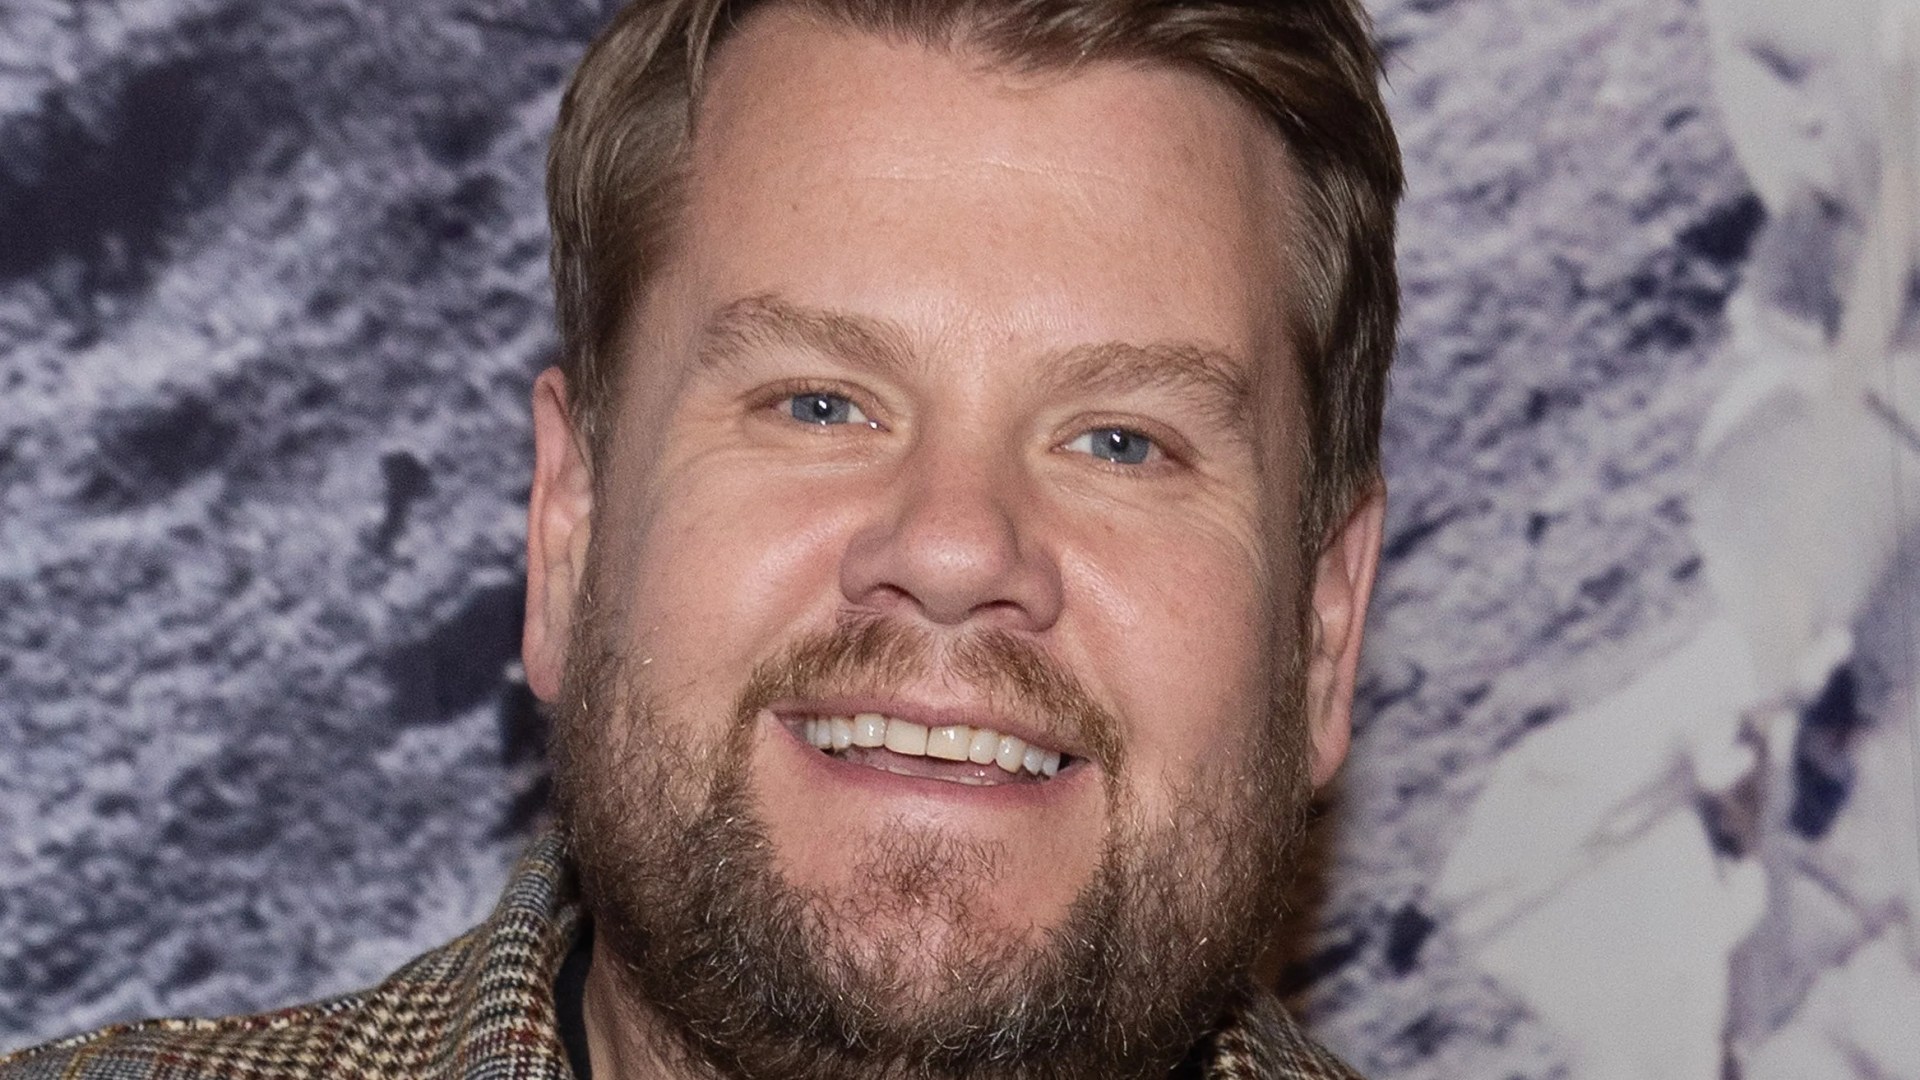 James Corden Secures Leading Role Post Late, Late Show Exit – Don’t Miss This!